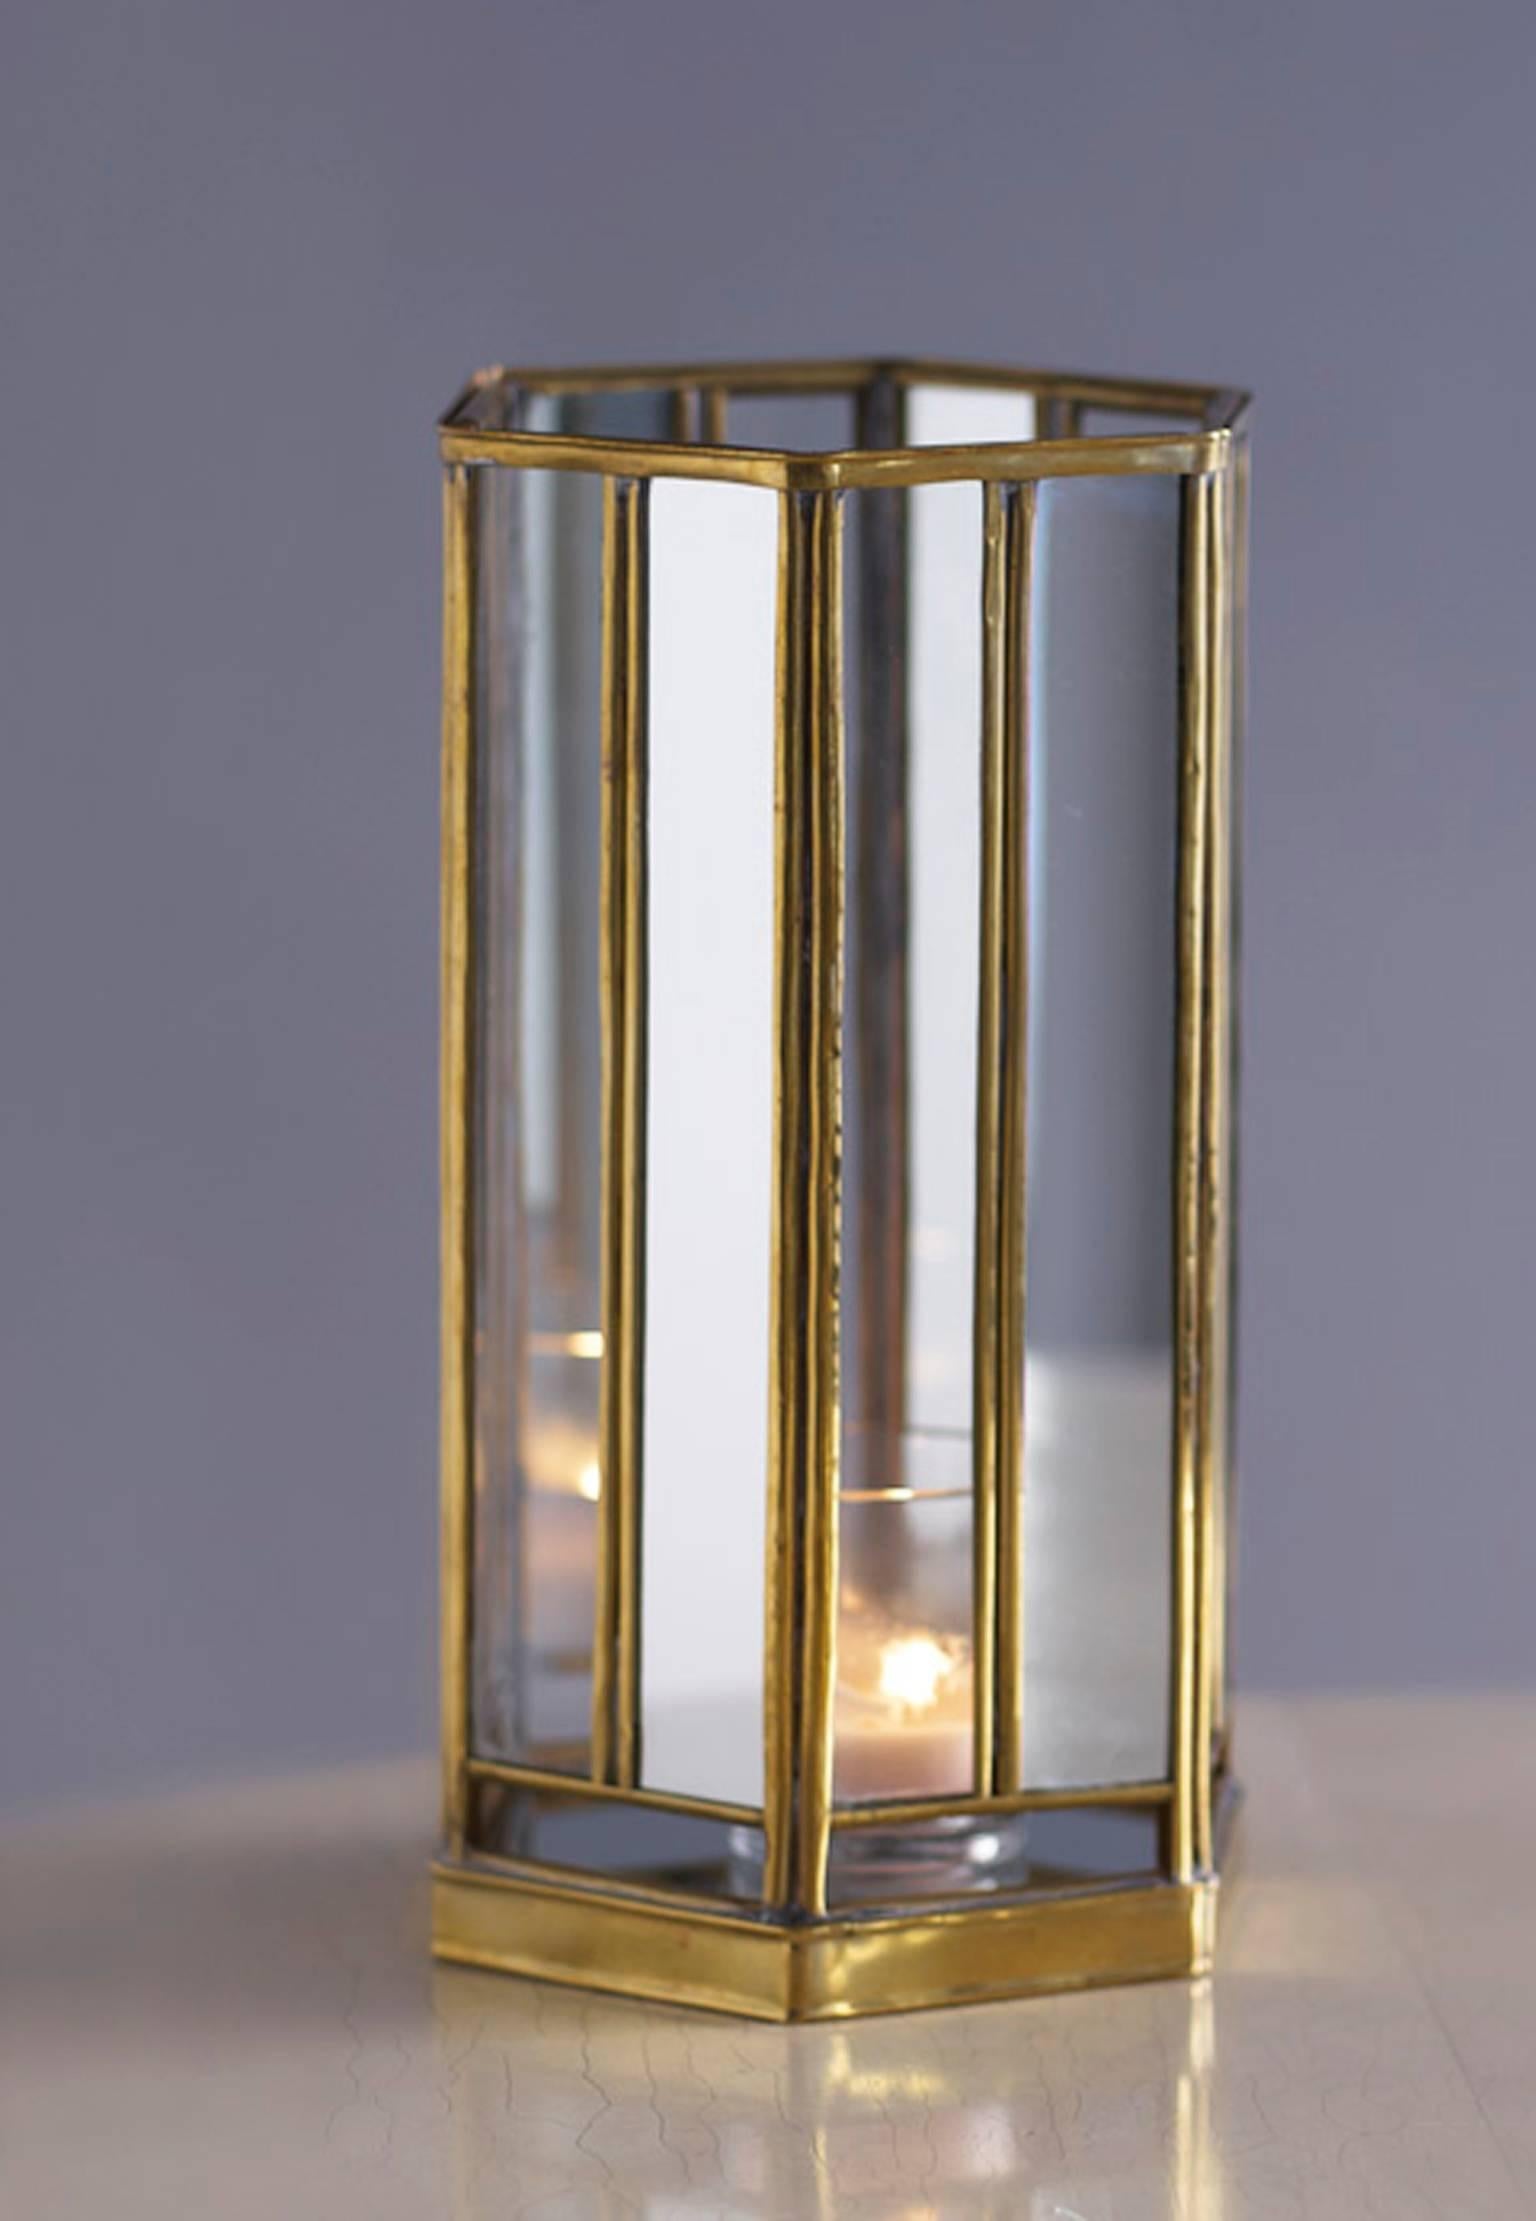 Hexagonal hurricane light with alternating panes of antiqued mirror and clear glass set in brass trim. Illuminated with a votive candle. 
Originally designed by Albert Hadley for the Pisces Club in Georgetown in the 1960s.
Made expressly for Liz